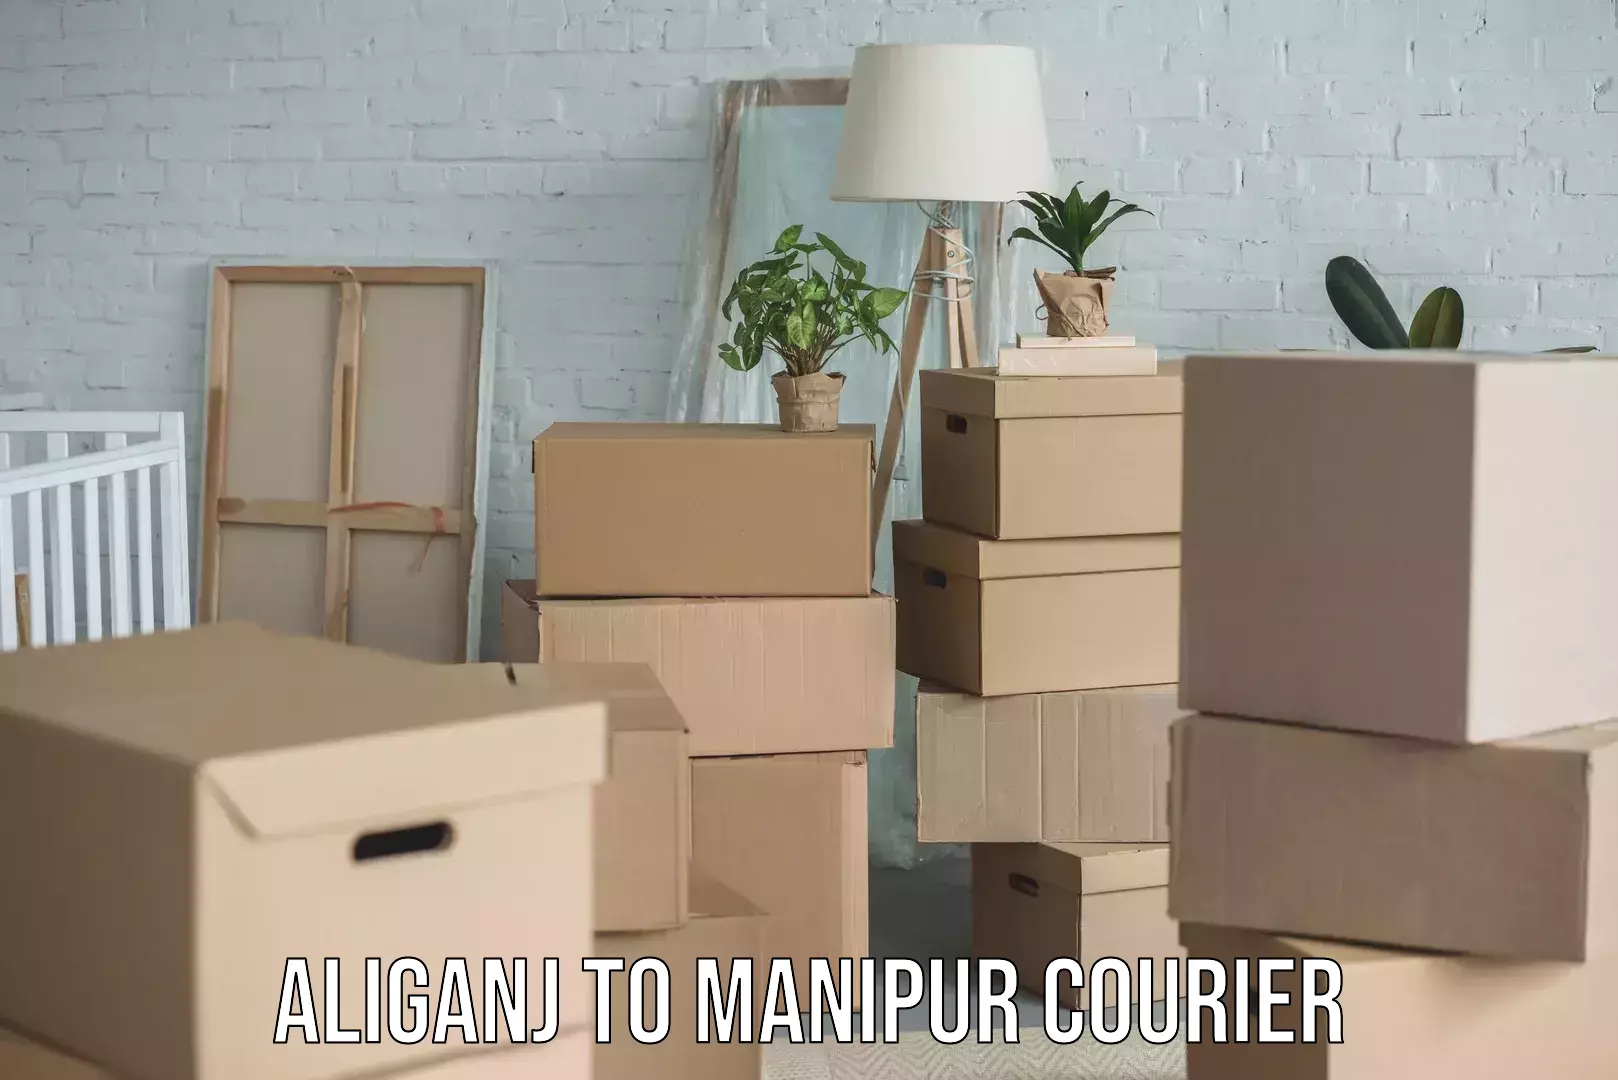 Supply chain delivery Aliganj to Manipur